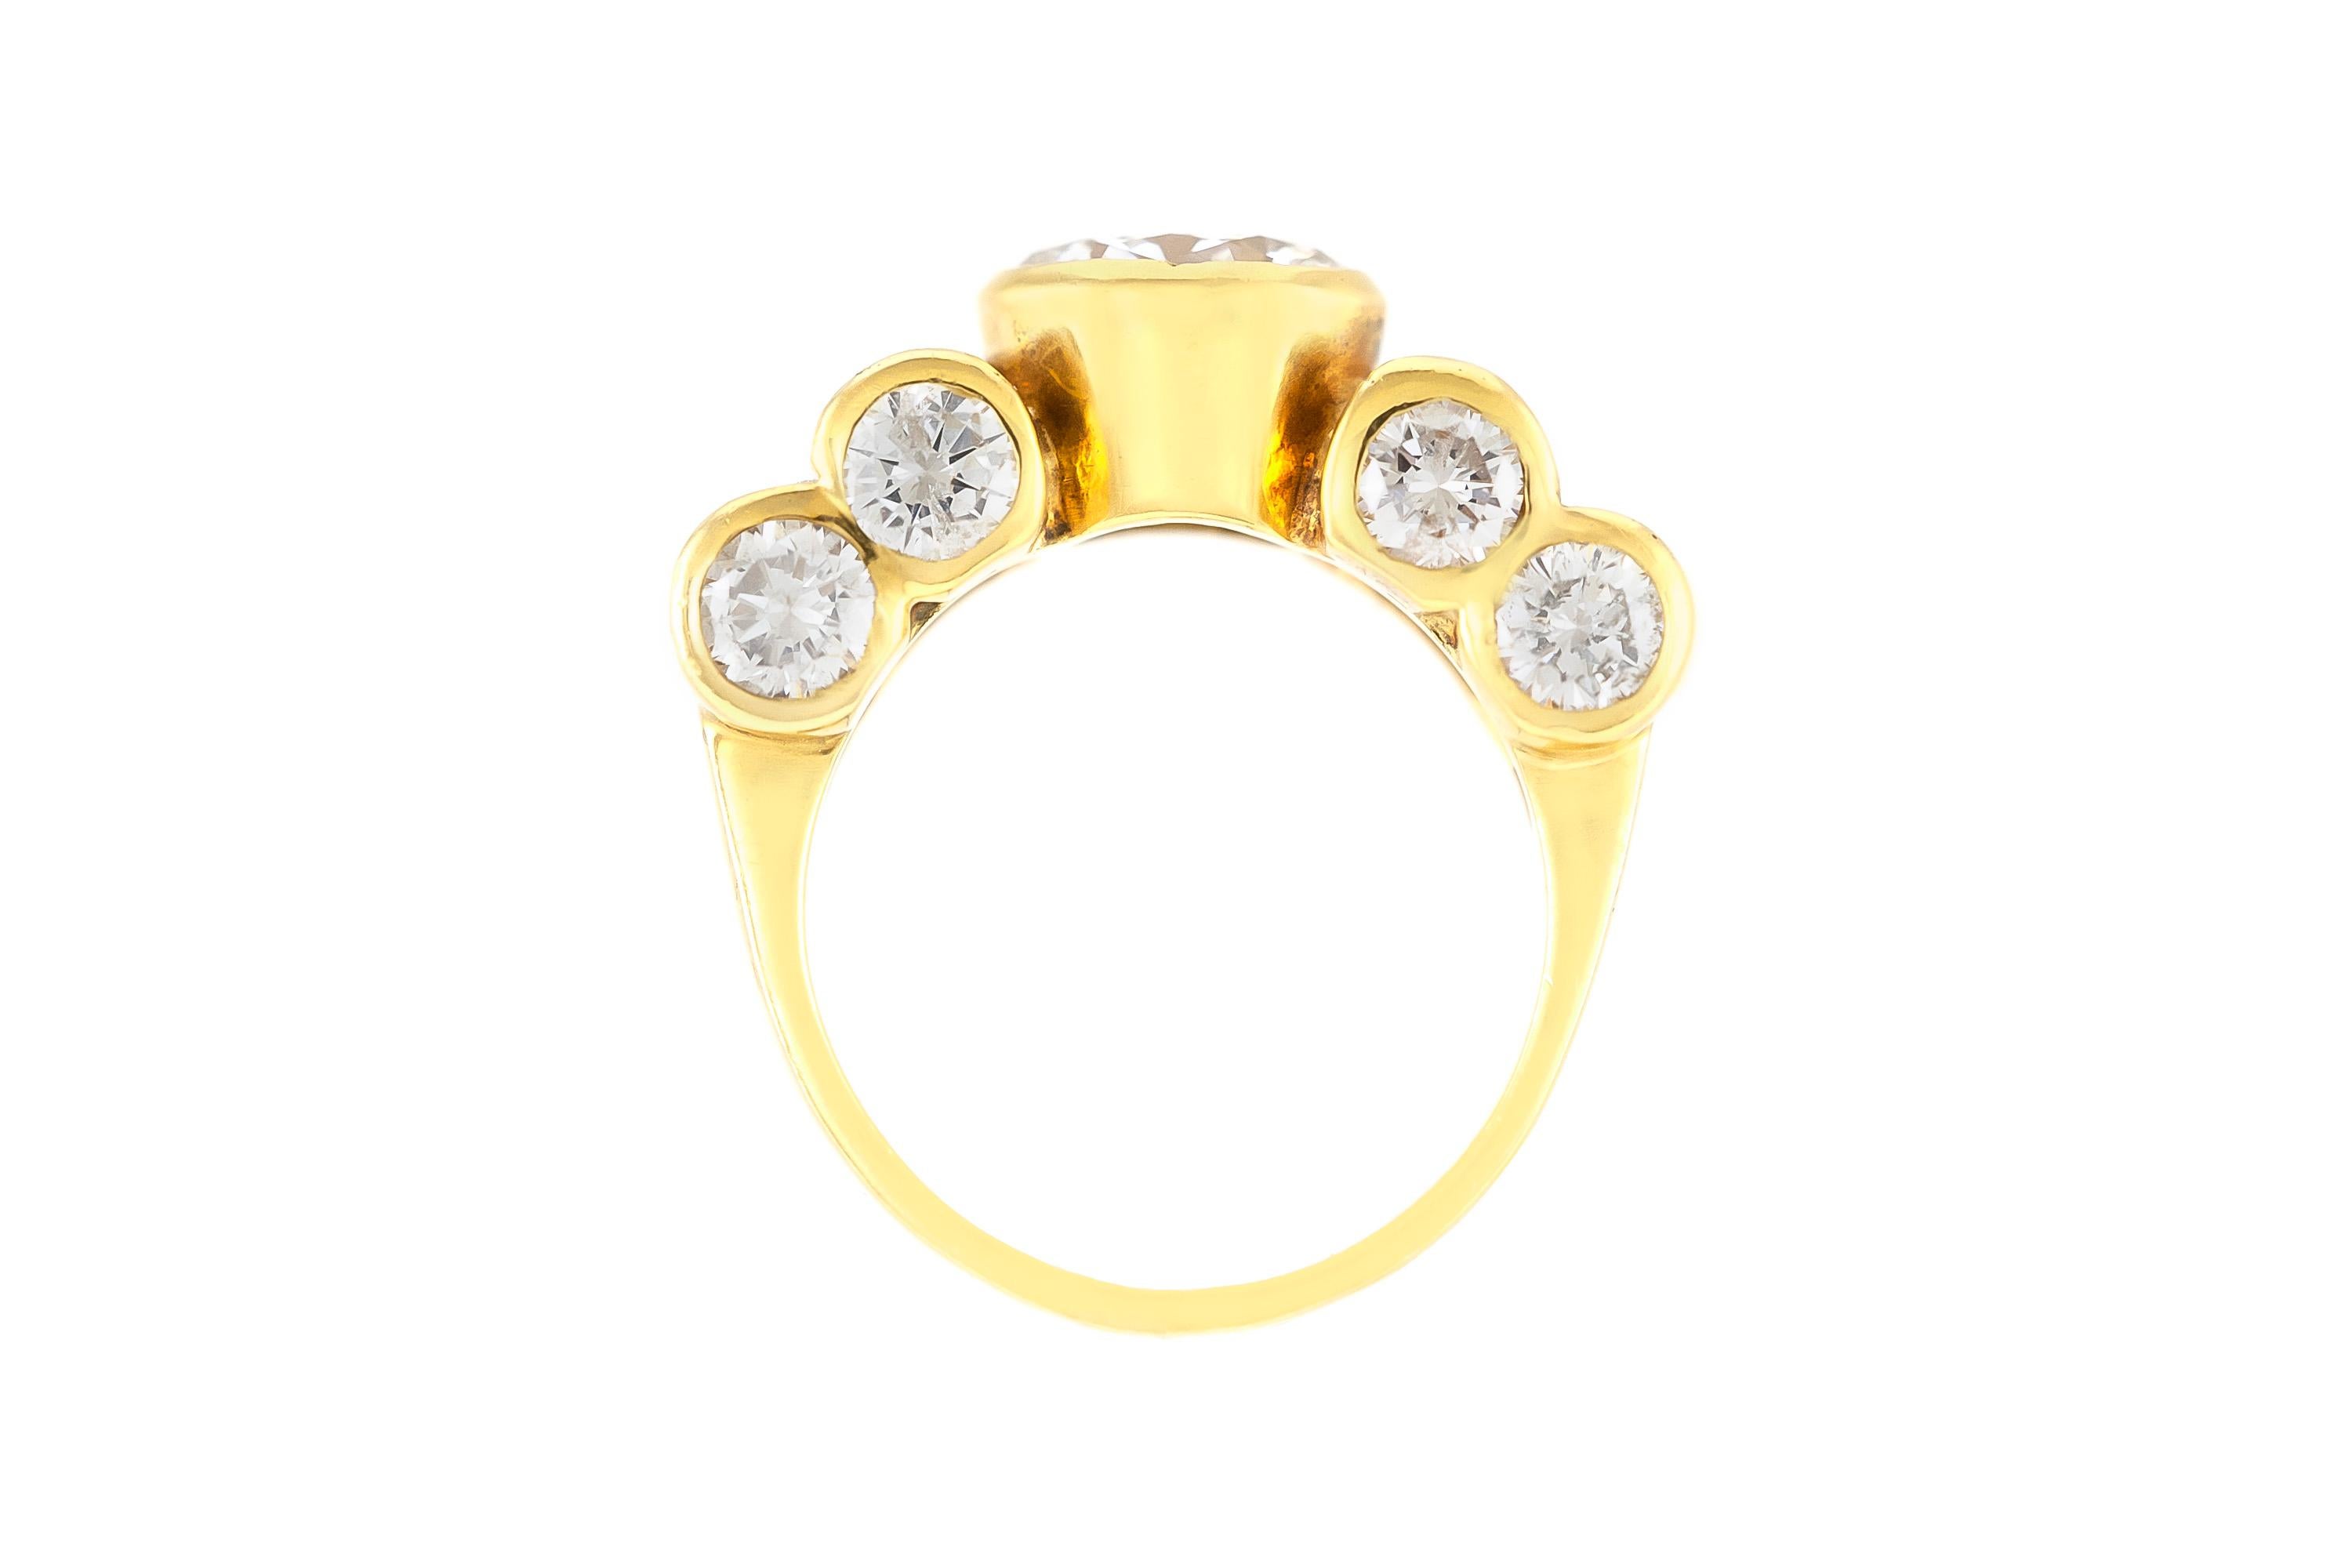 The ring is finely crafted in 18k yellow gold with center round diamond weighing approximately total of 1.41.
Color G    Clarity VS2 .
With rounds and baguettes diamonds weighing approximately total of 3.50 carat.
Circa 1980.
